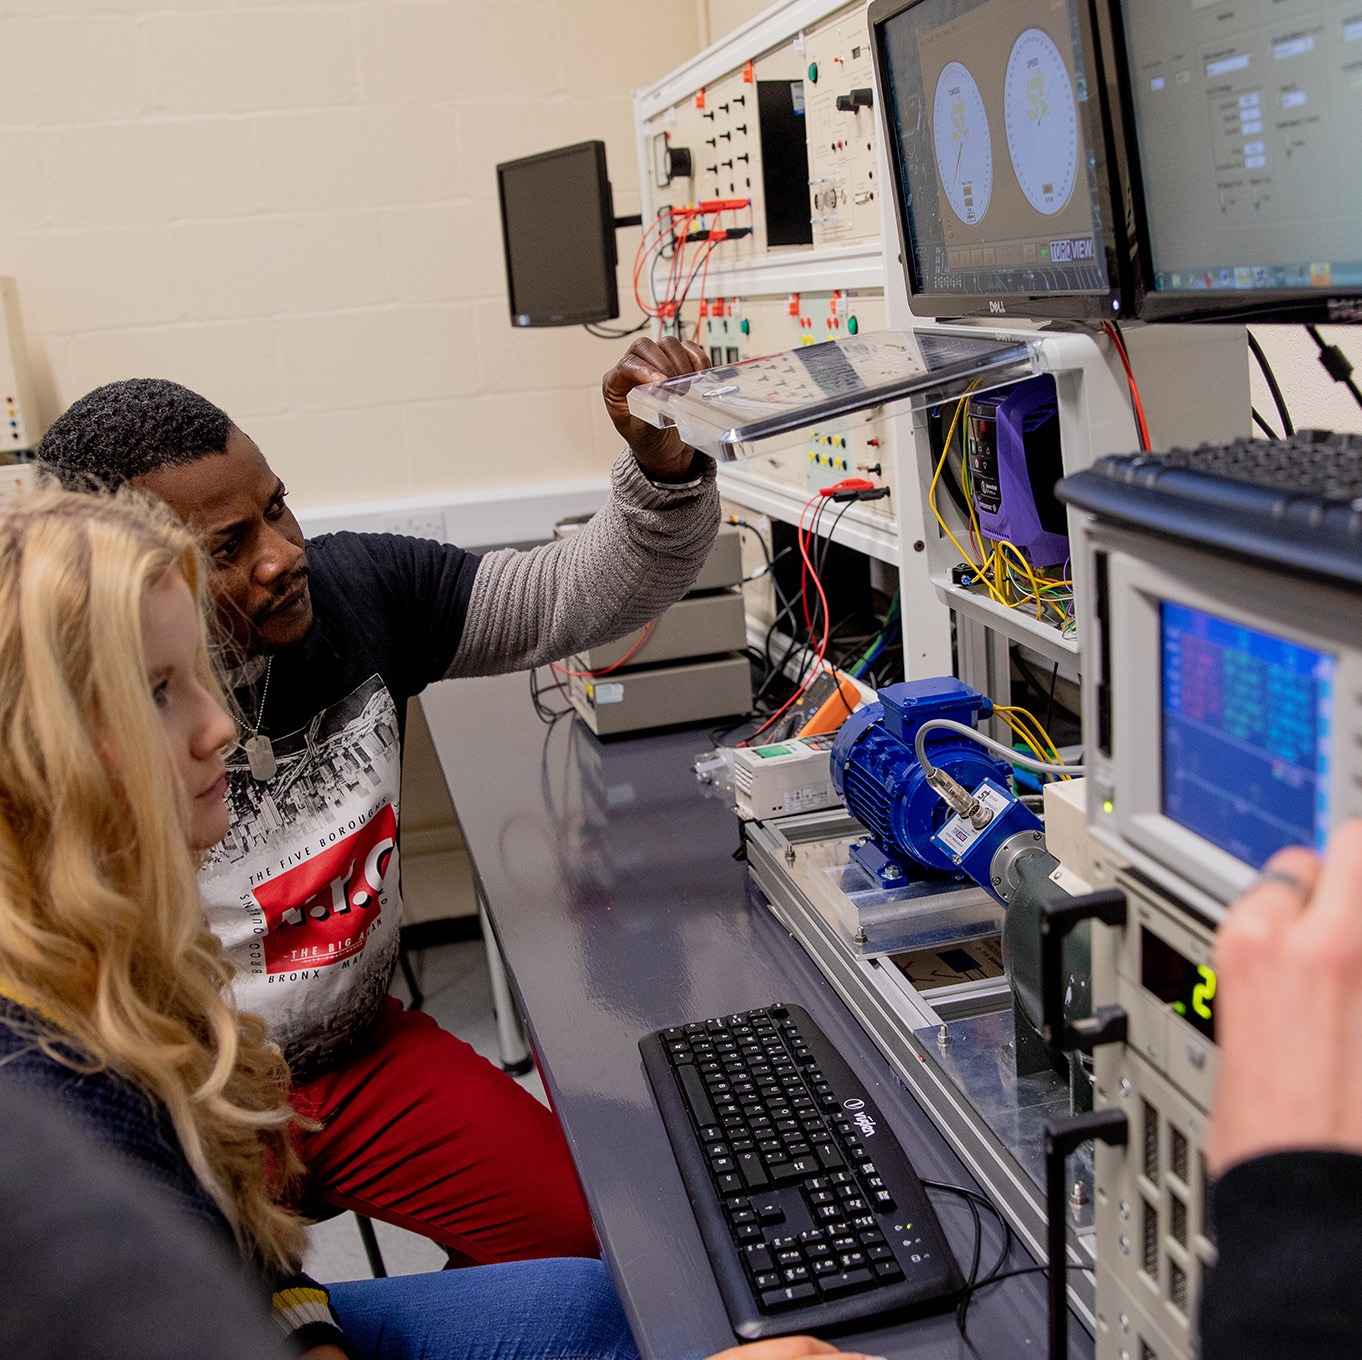 Students using electrical engineering facilities